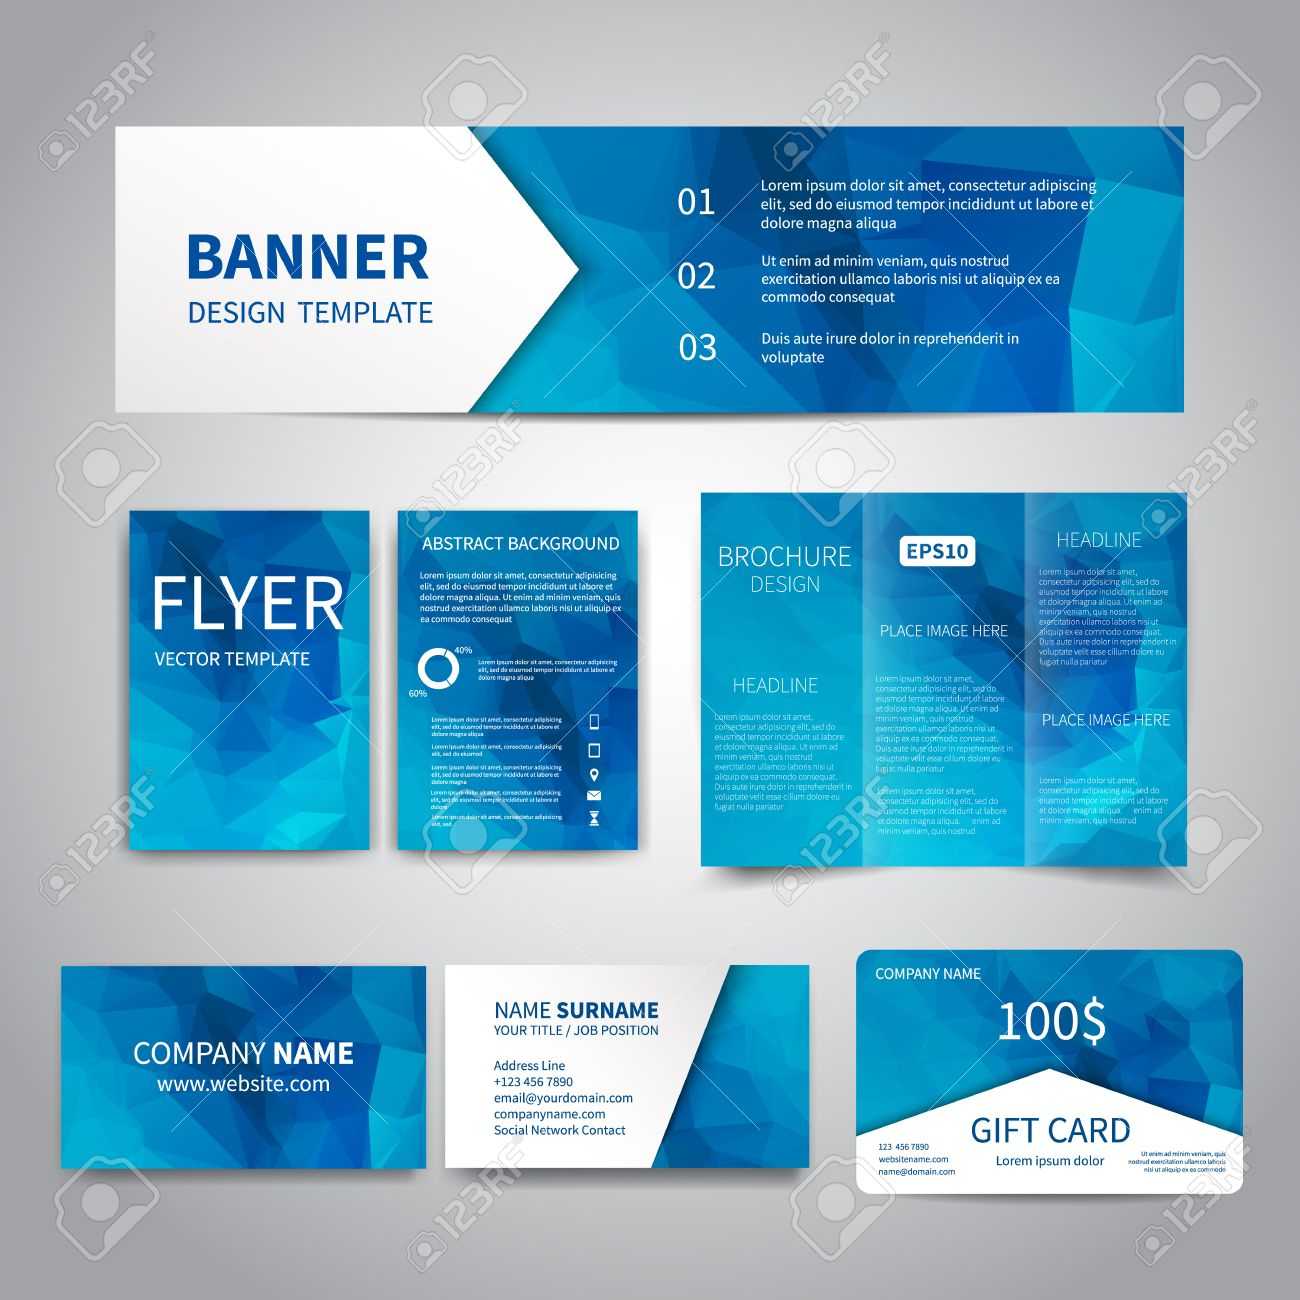 Banner, Flyers, Brochure, Business Cards, Gift Card Design Templates.. Within Advertising Cards Templates